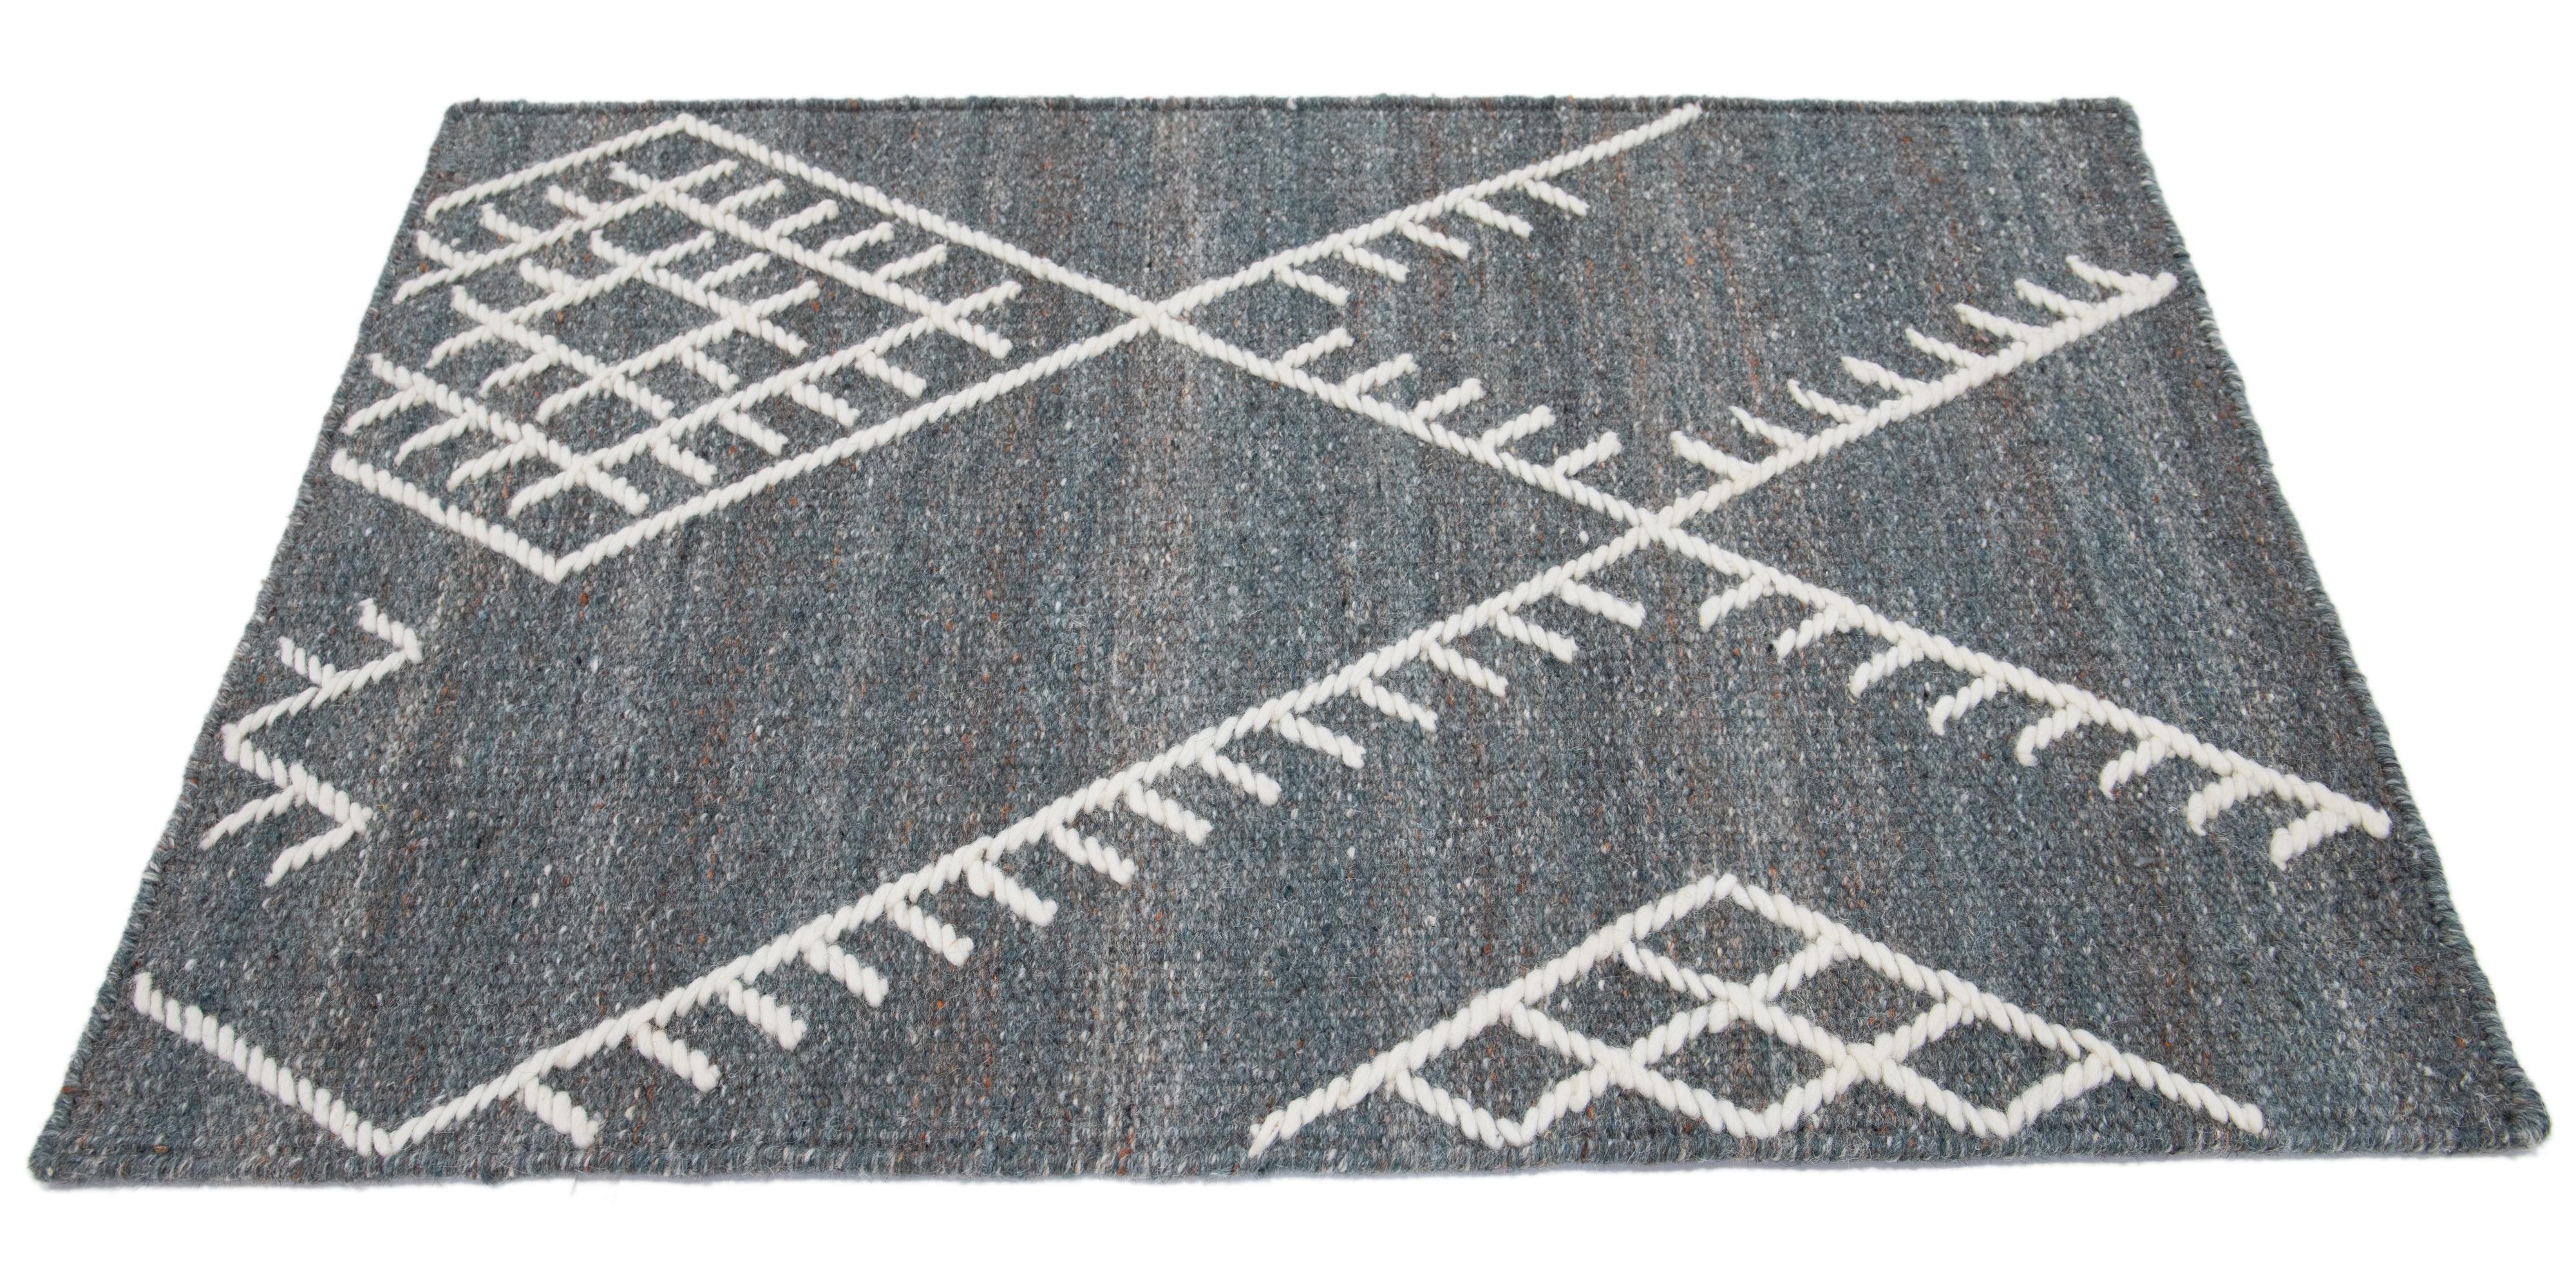 Apadana's Nantucket Collection wool custom rug. Custom sizes and colors made-to-order. 

Material: Wool 
Techniques: Flatweave
Style: Geometric-Coastal
Lead time: Approx. 15-16 wks available 
Colors: As shown, other custom colors are